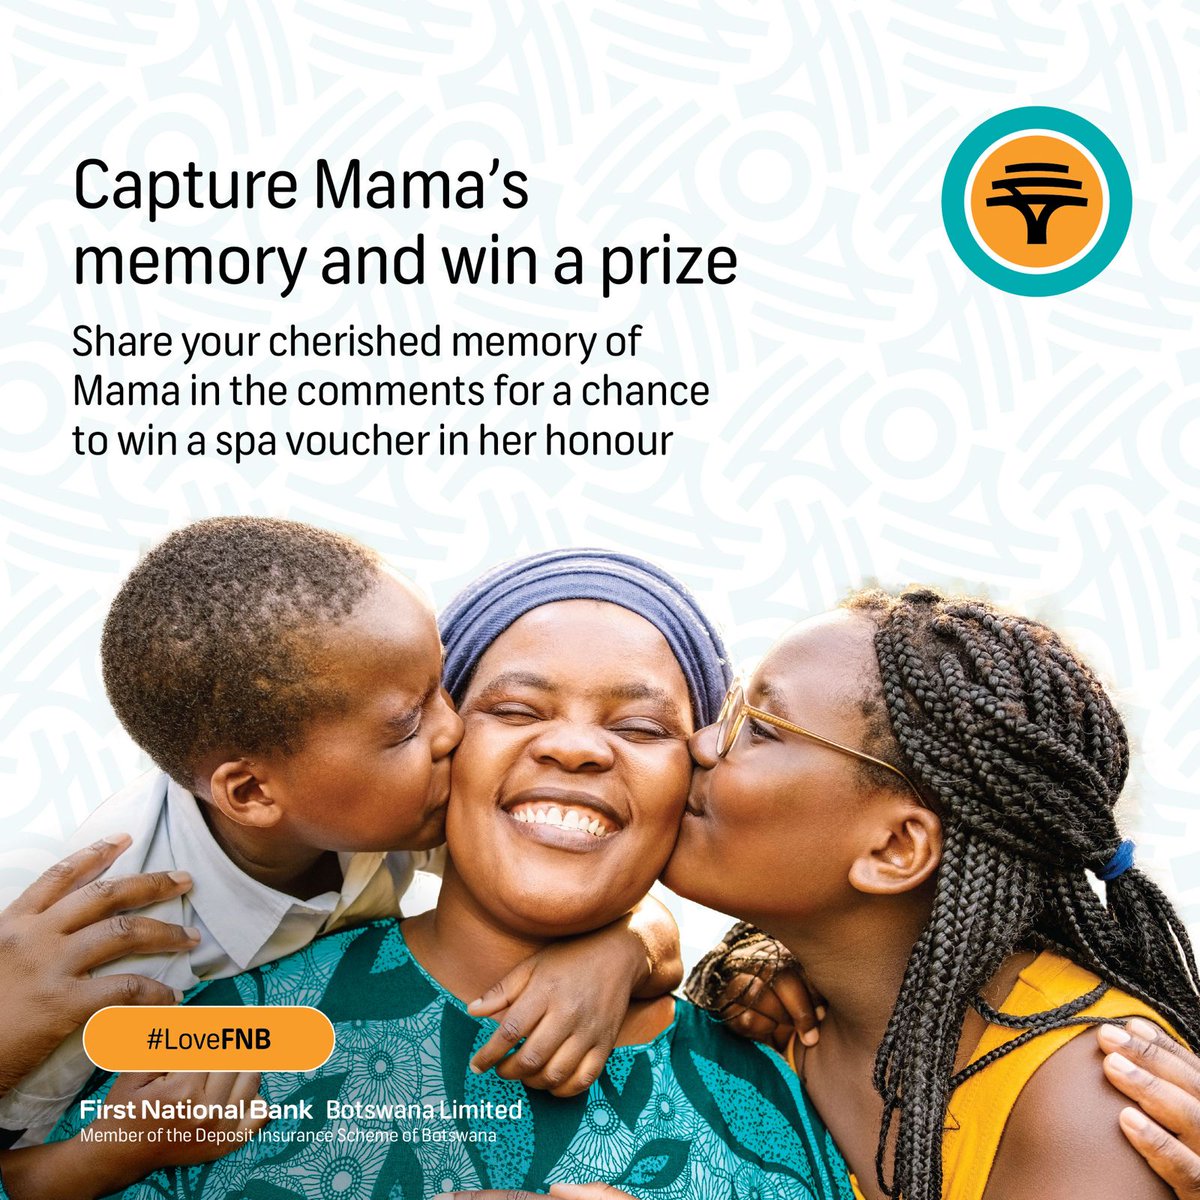 How are you celebrating your mom this Mother’s Day?

Reply below with your favorite memory of her. Whether it’s a heartwarming tale, a life lesson, or a cherished moment! Share your story and you might win a spa voucher to pamper her! 

#MothersDayWithFNB
#LoveFNB